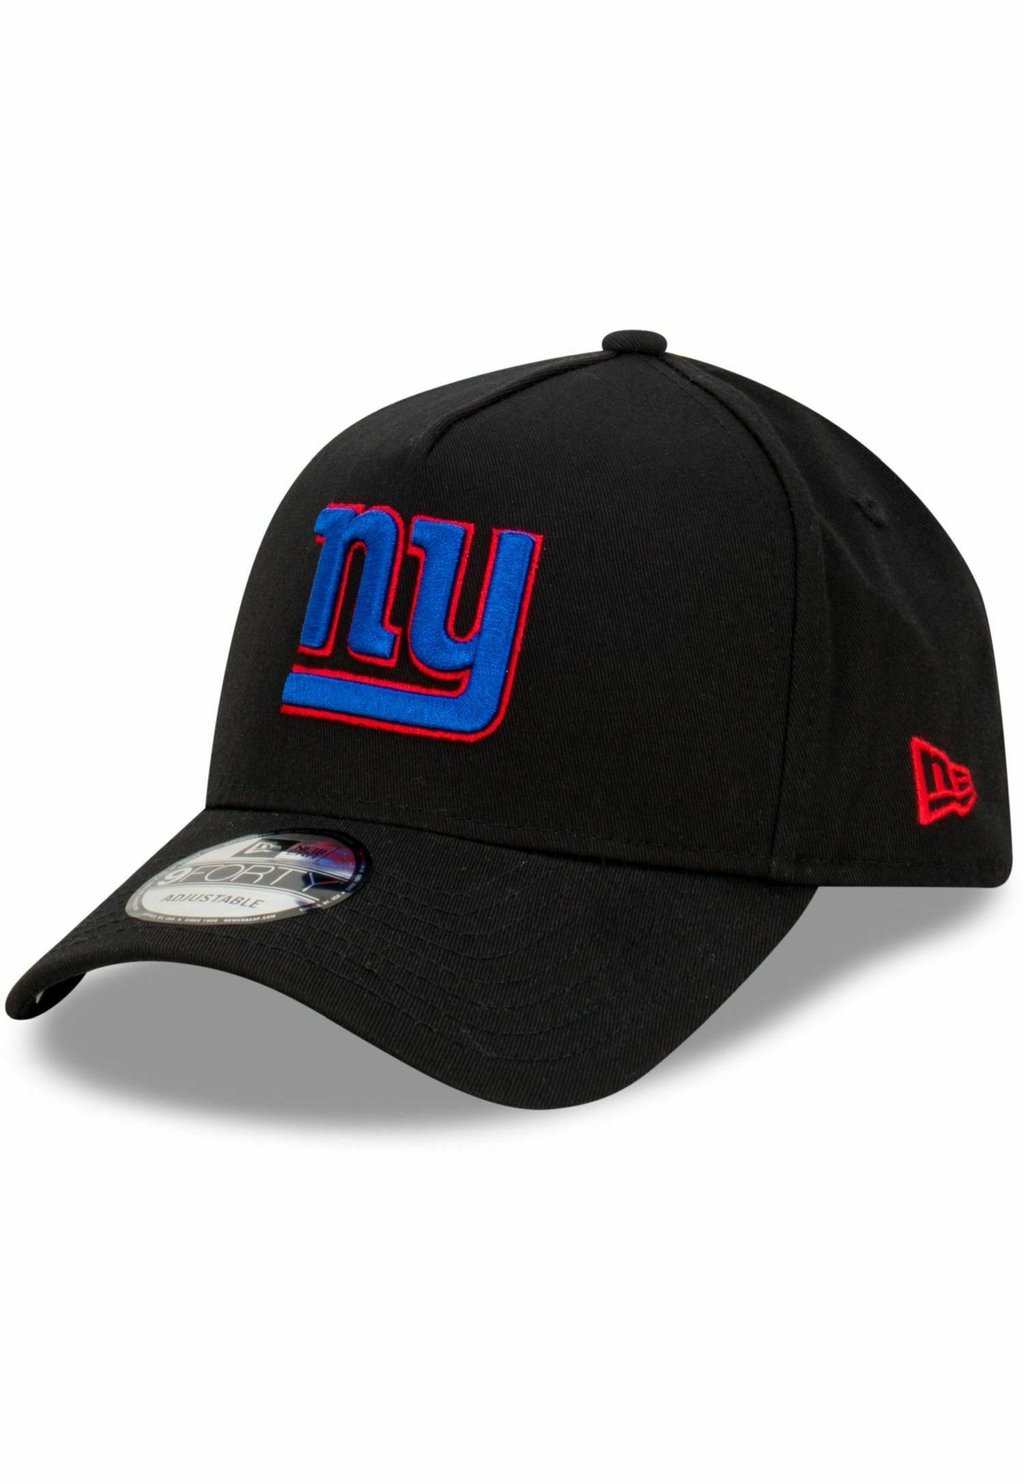 Бейсболка 9FORTY AFRAME TRUCKER NFL TEAMS New Era, цвет new york giants new giants youth s fans rugby jerseys lawrence taylor saquon barkley sports fans american football new york jersey t shirts